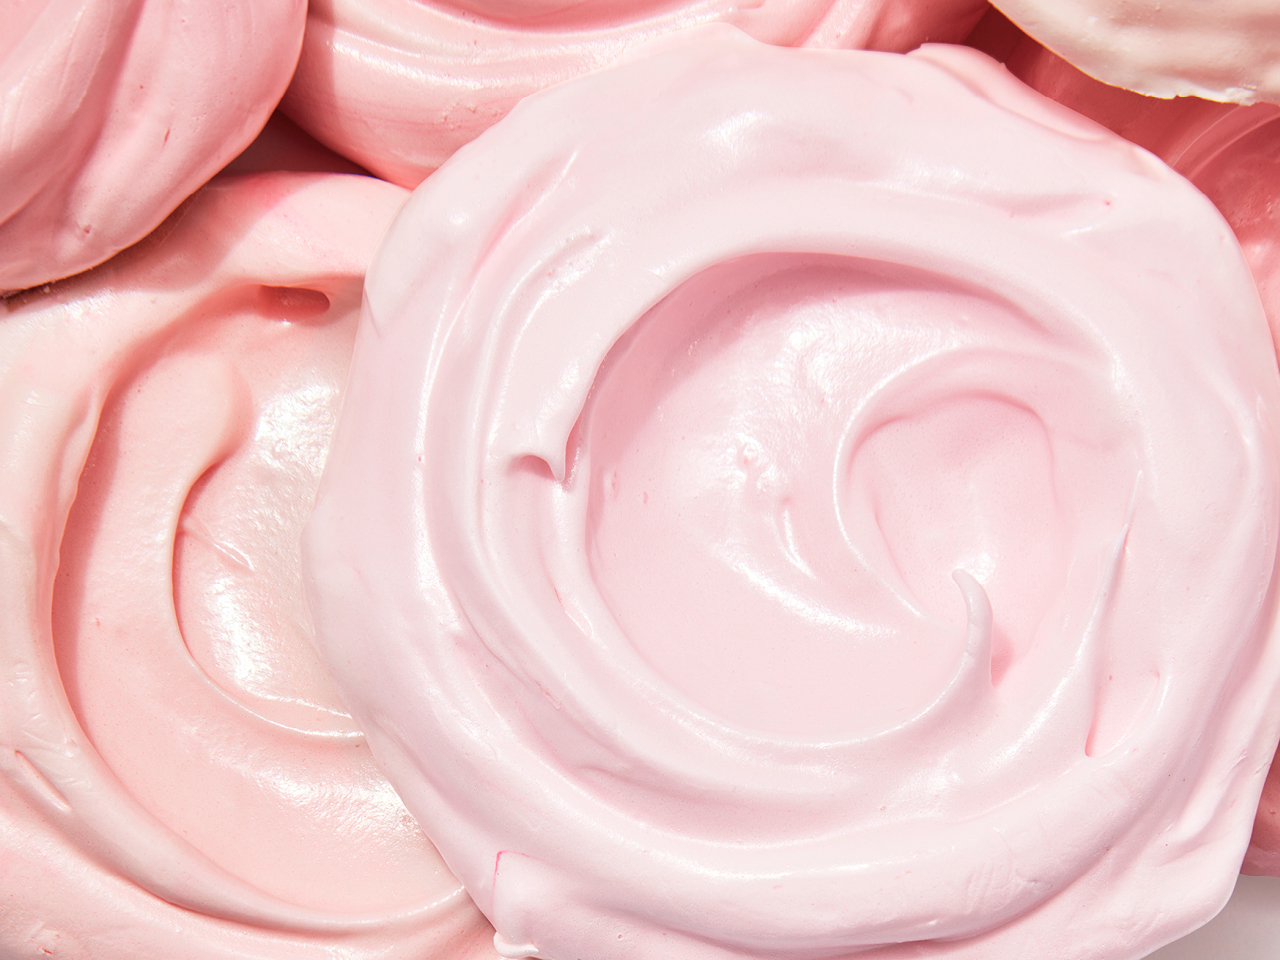 A light pink circle swirl on top of other pink swirls.